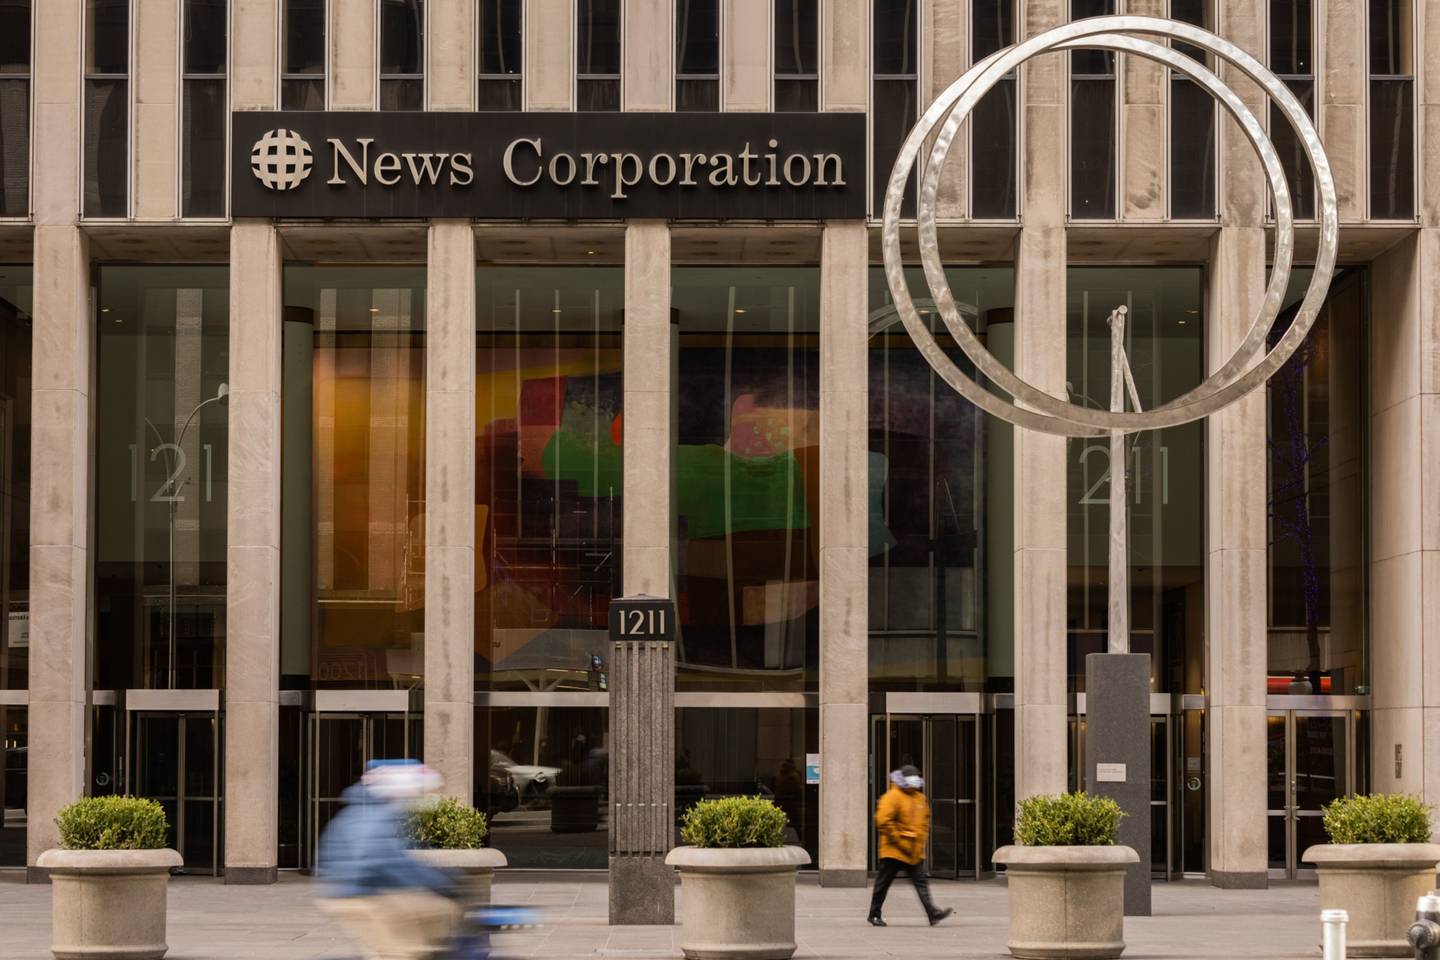 News Corp's offices